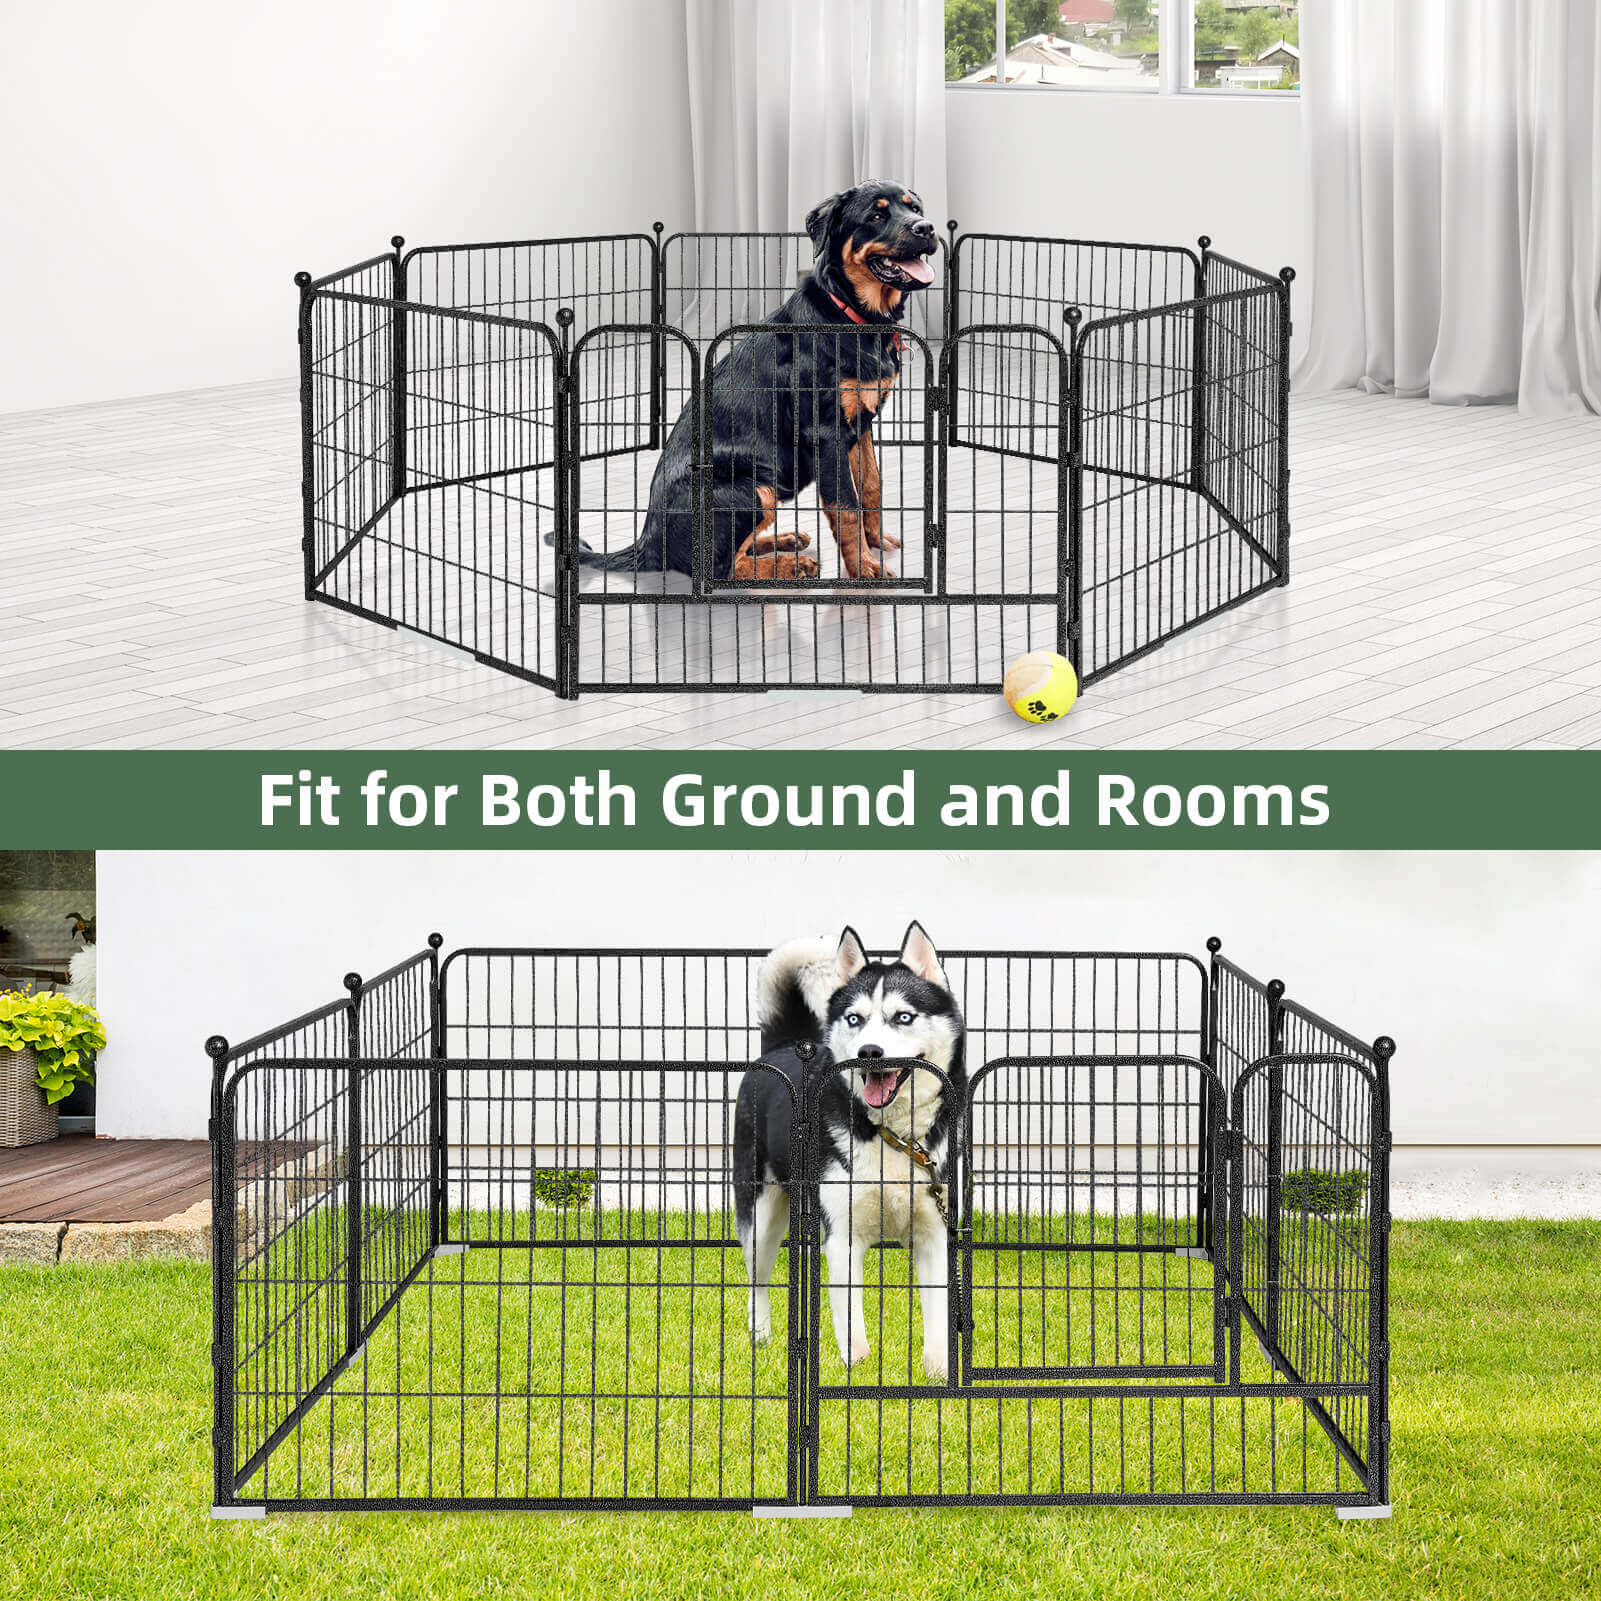 Elecwish High-Security Pet Fences fits both ground and rooms